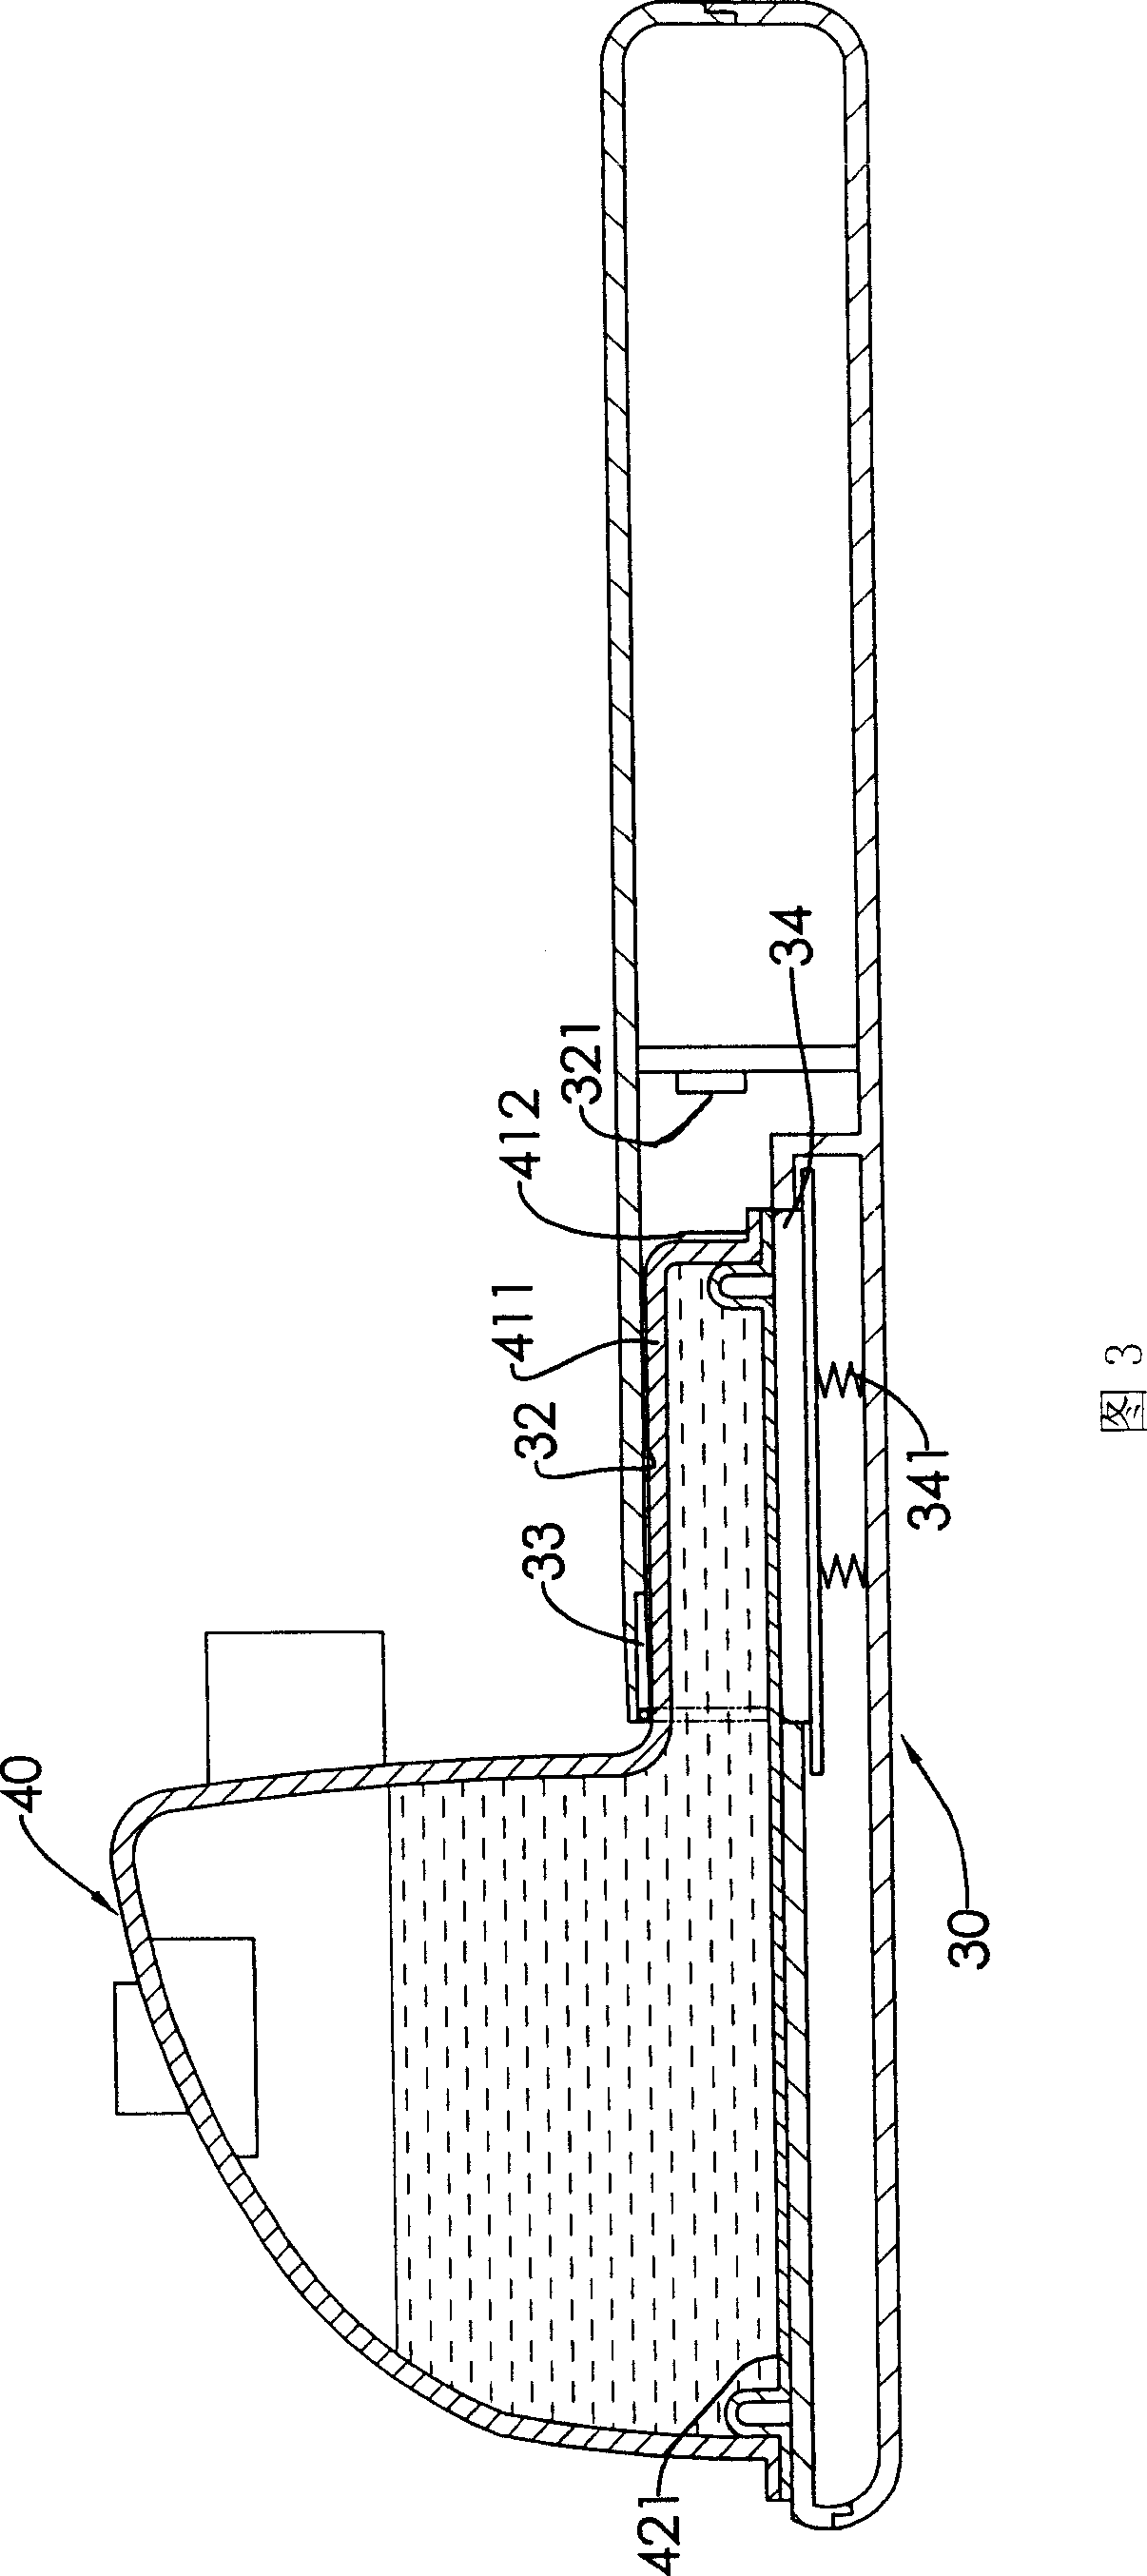 Warming disk assembly of respiration therapeutic equipment